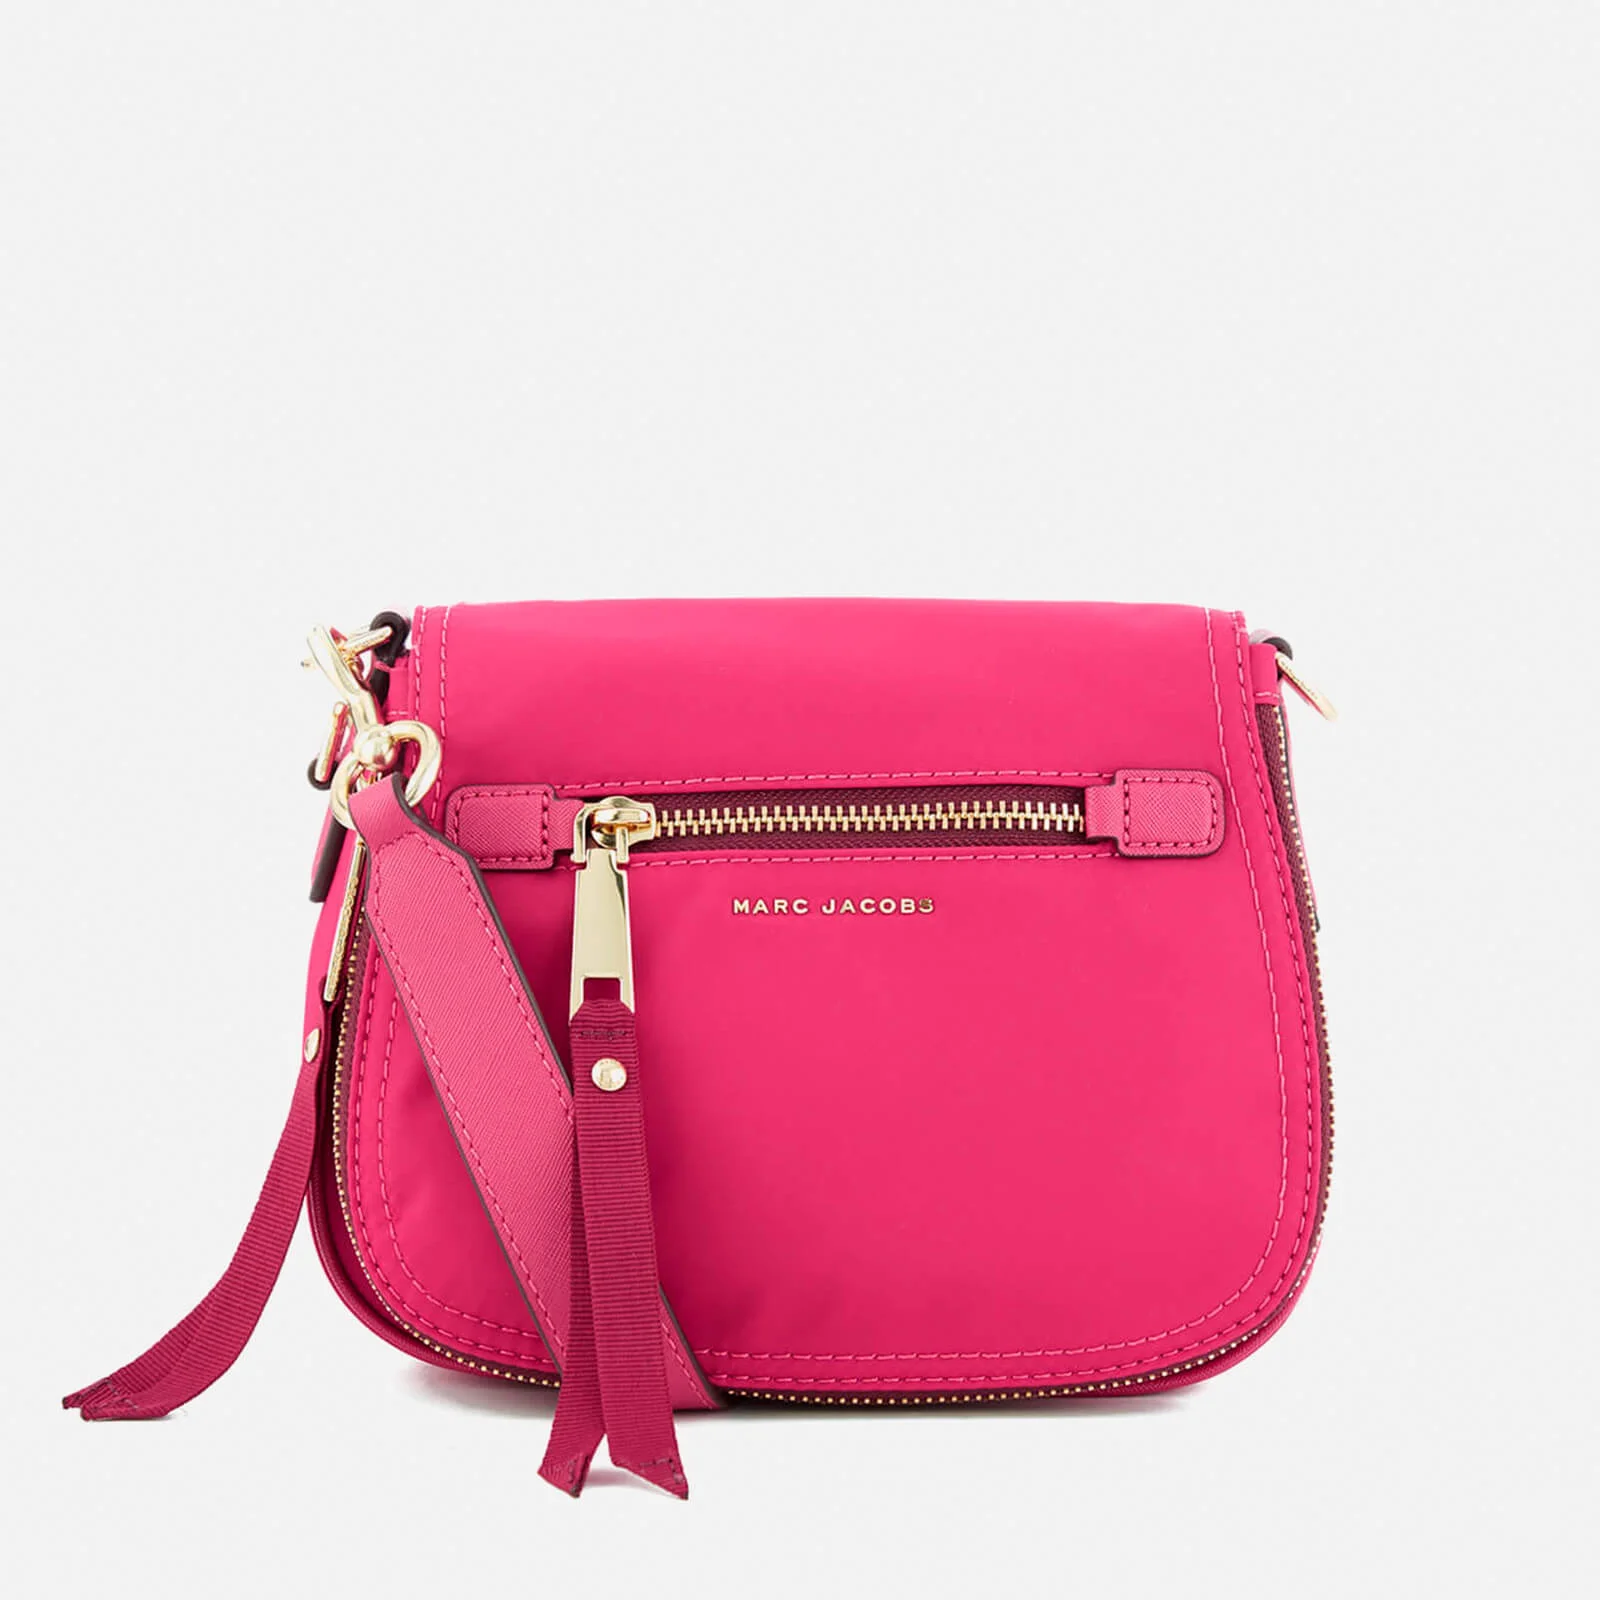 Marc Jacobs Women's Trooper Small Nomad Bag - Hibiscus Image 1